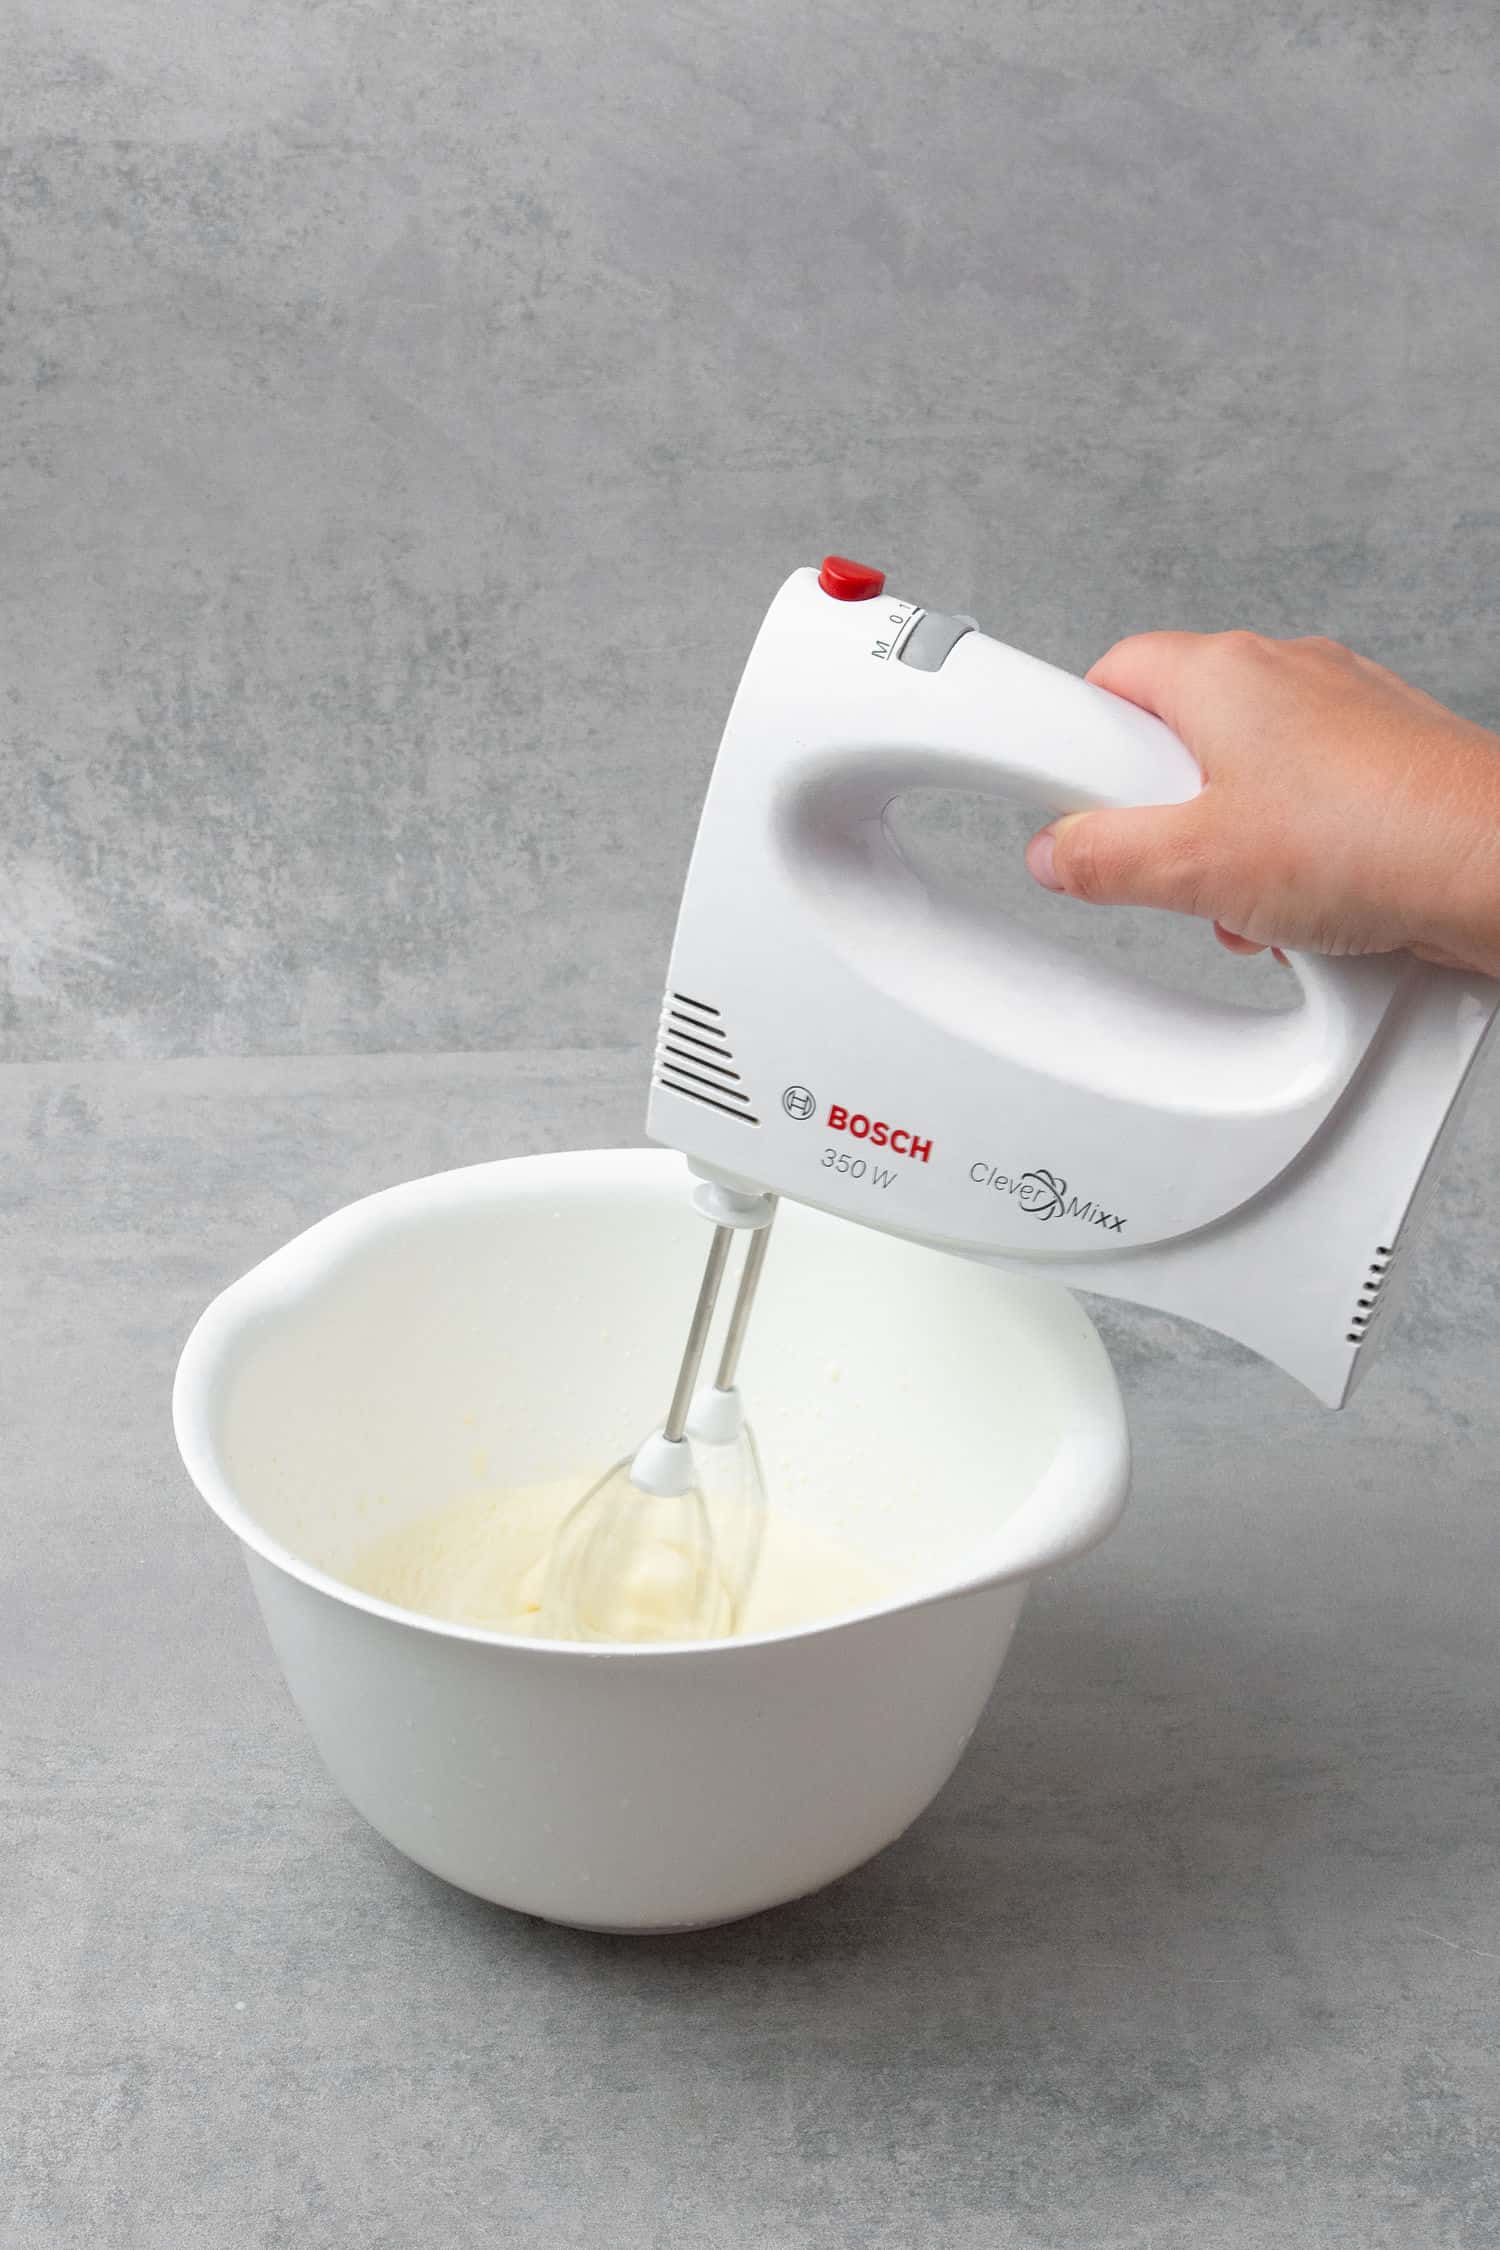 making the whipped mascarpone with an electric stand mixer.